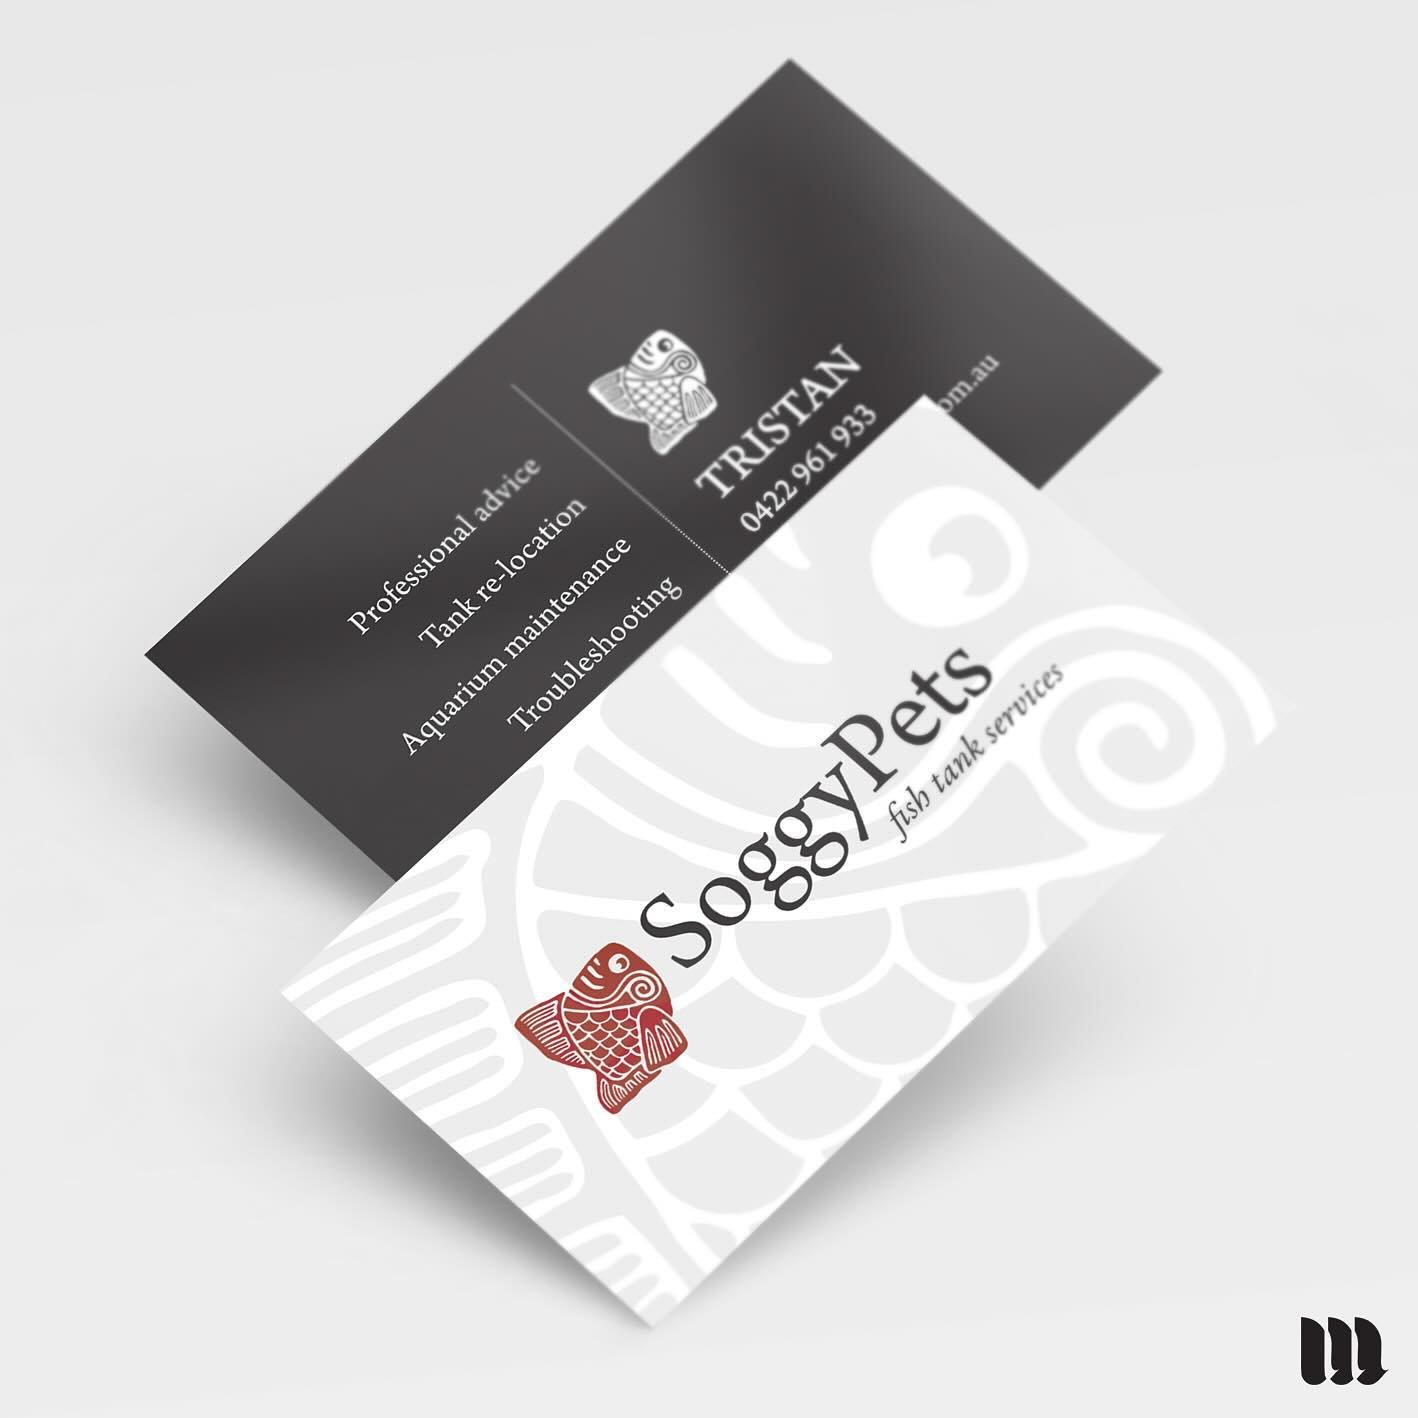 { PORT FOLIO } From the archives: Business card design. 
.
.
#MaryRizzaCruzCreative #Logo #LogoDesign #businesscard #businesscarddesign #GraphicDesign #Design #Creativity #typography #typographyart #adobe #graphic #logodesigner #logodesigns #logotype